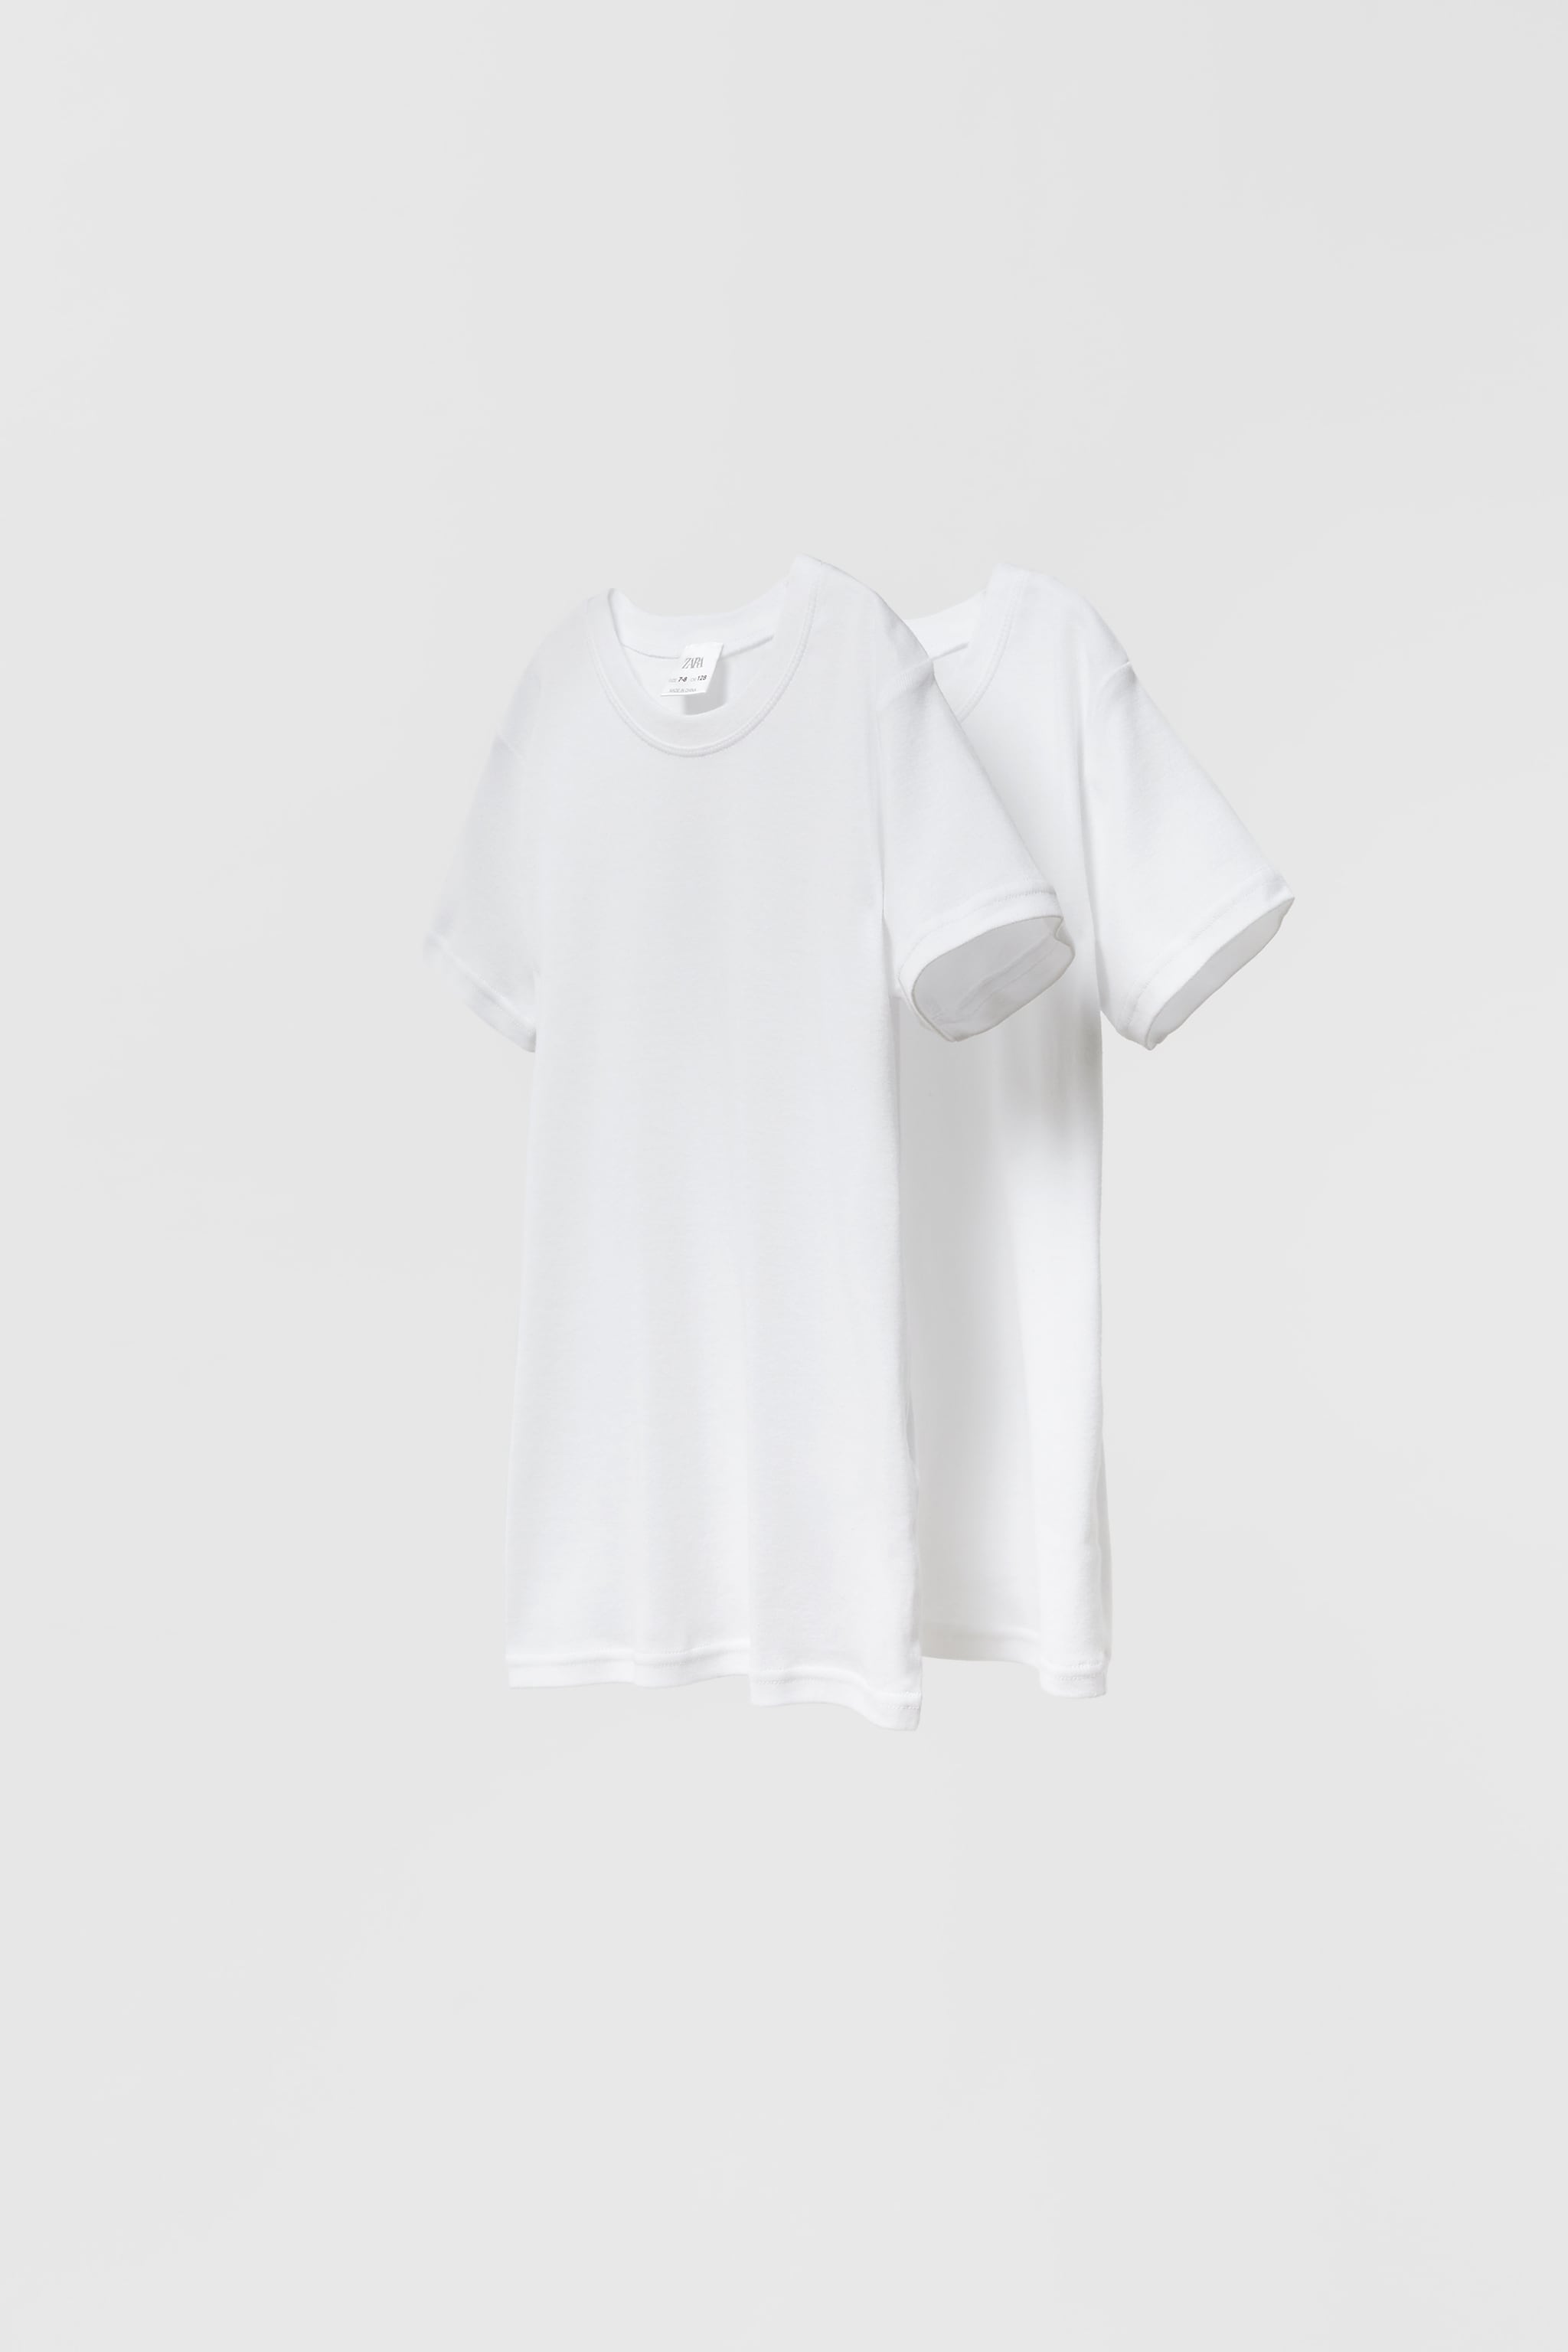 6-14 YEARS/ TWO-PACK OF BASIC T-SHIRTS